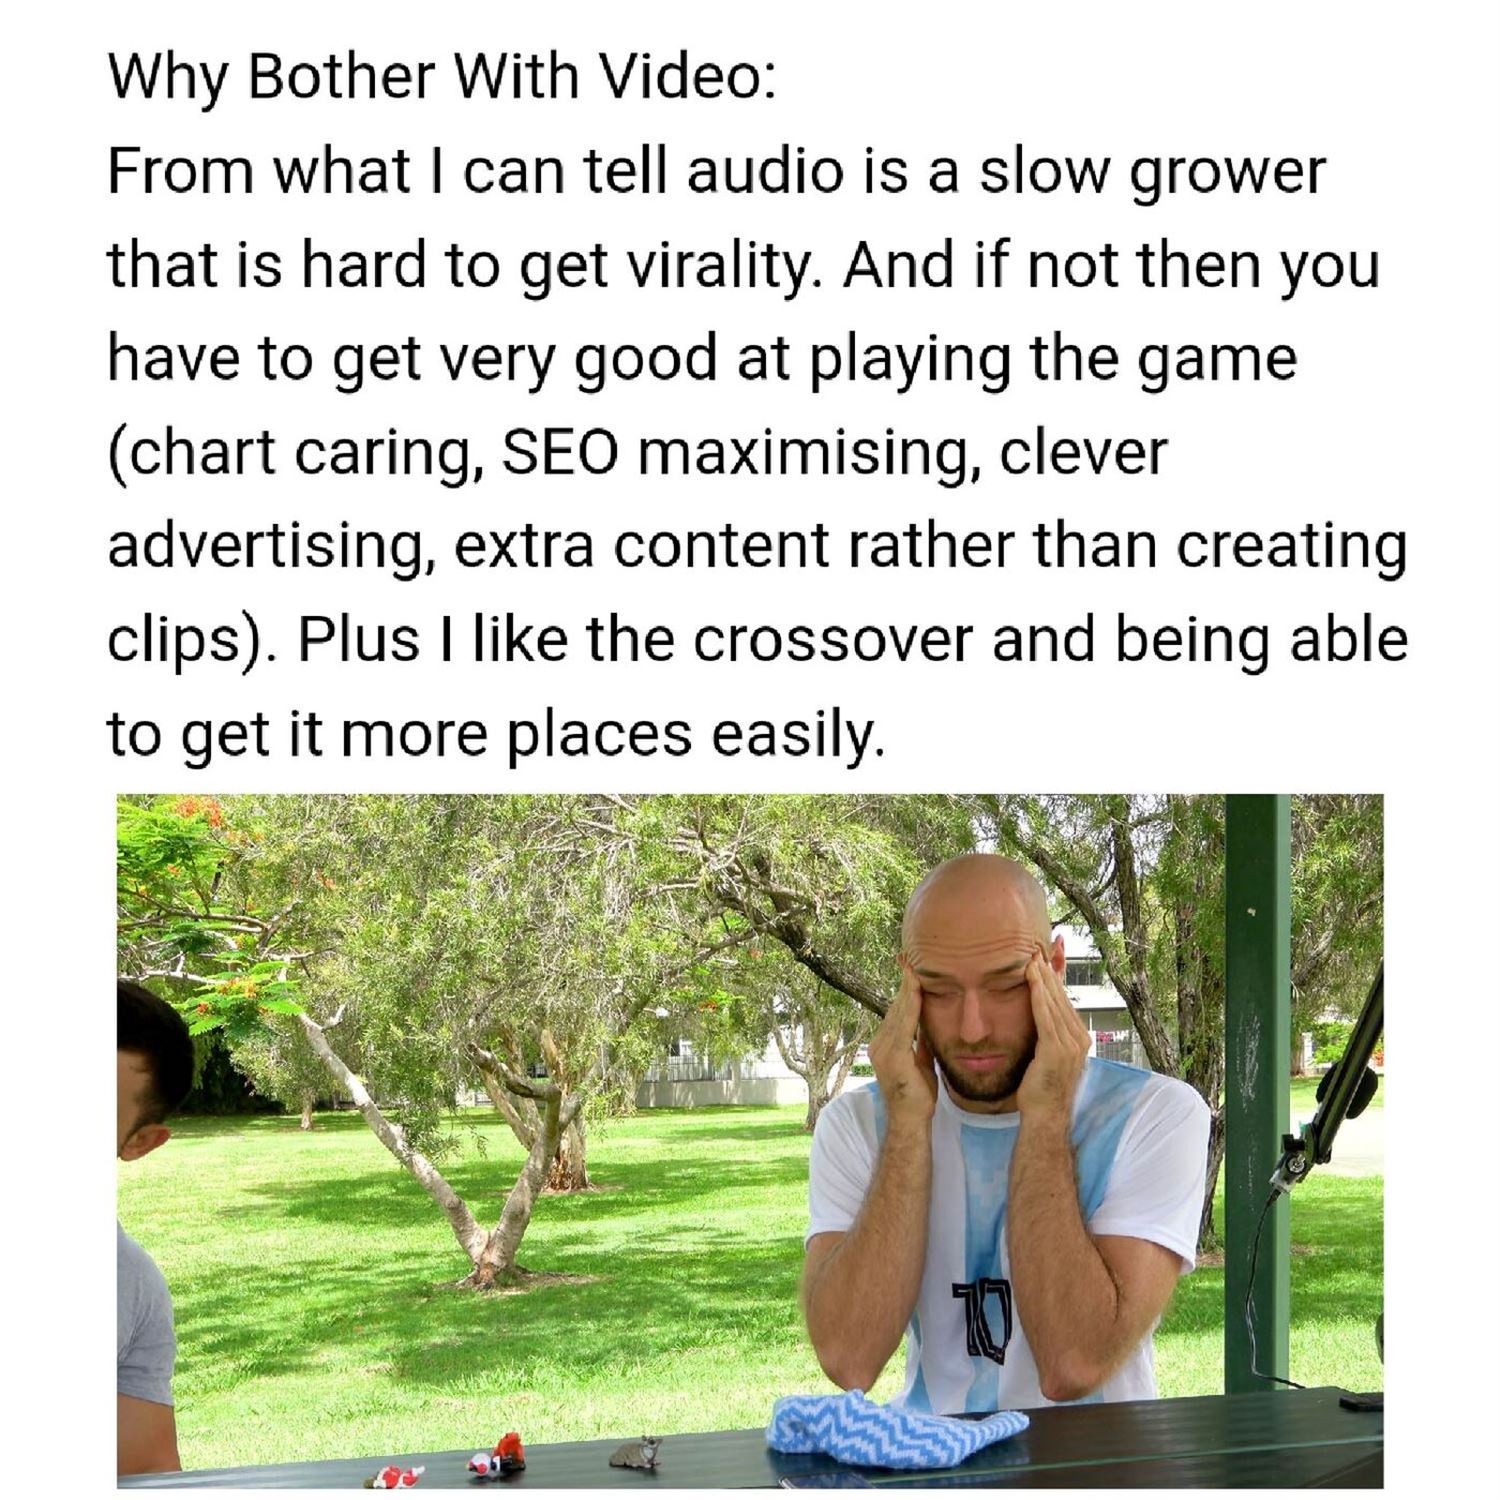 Why bother with video?